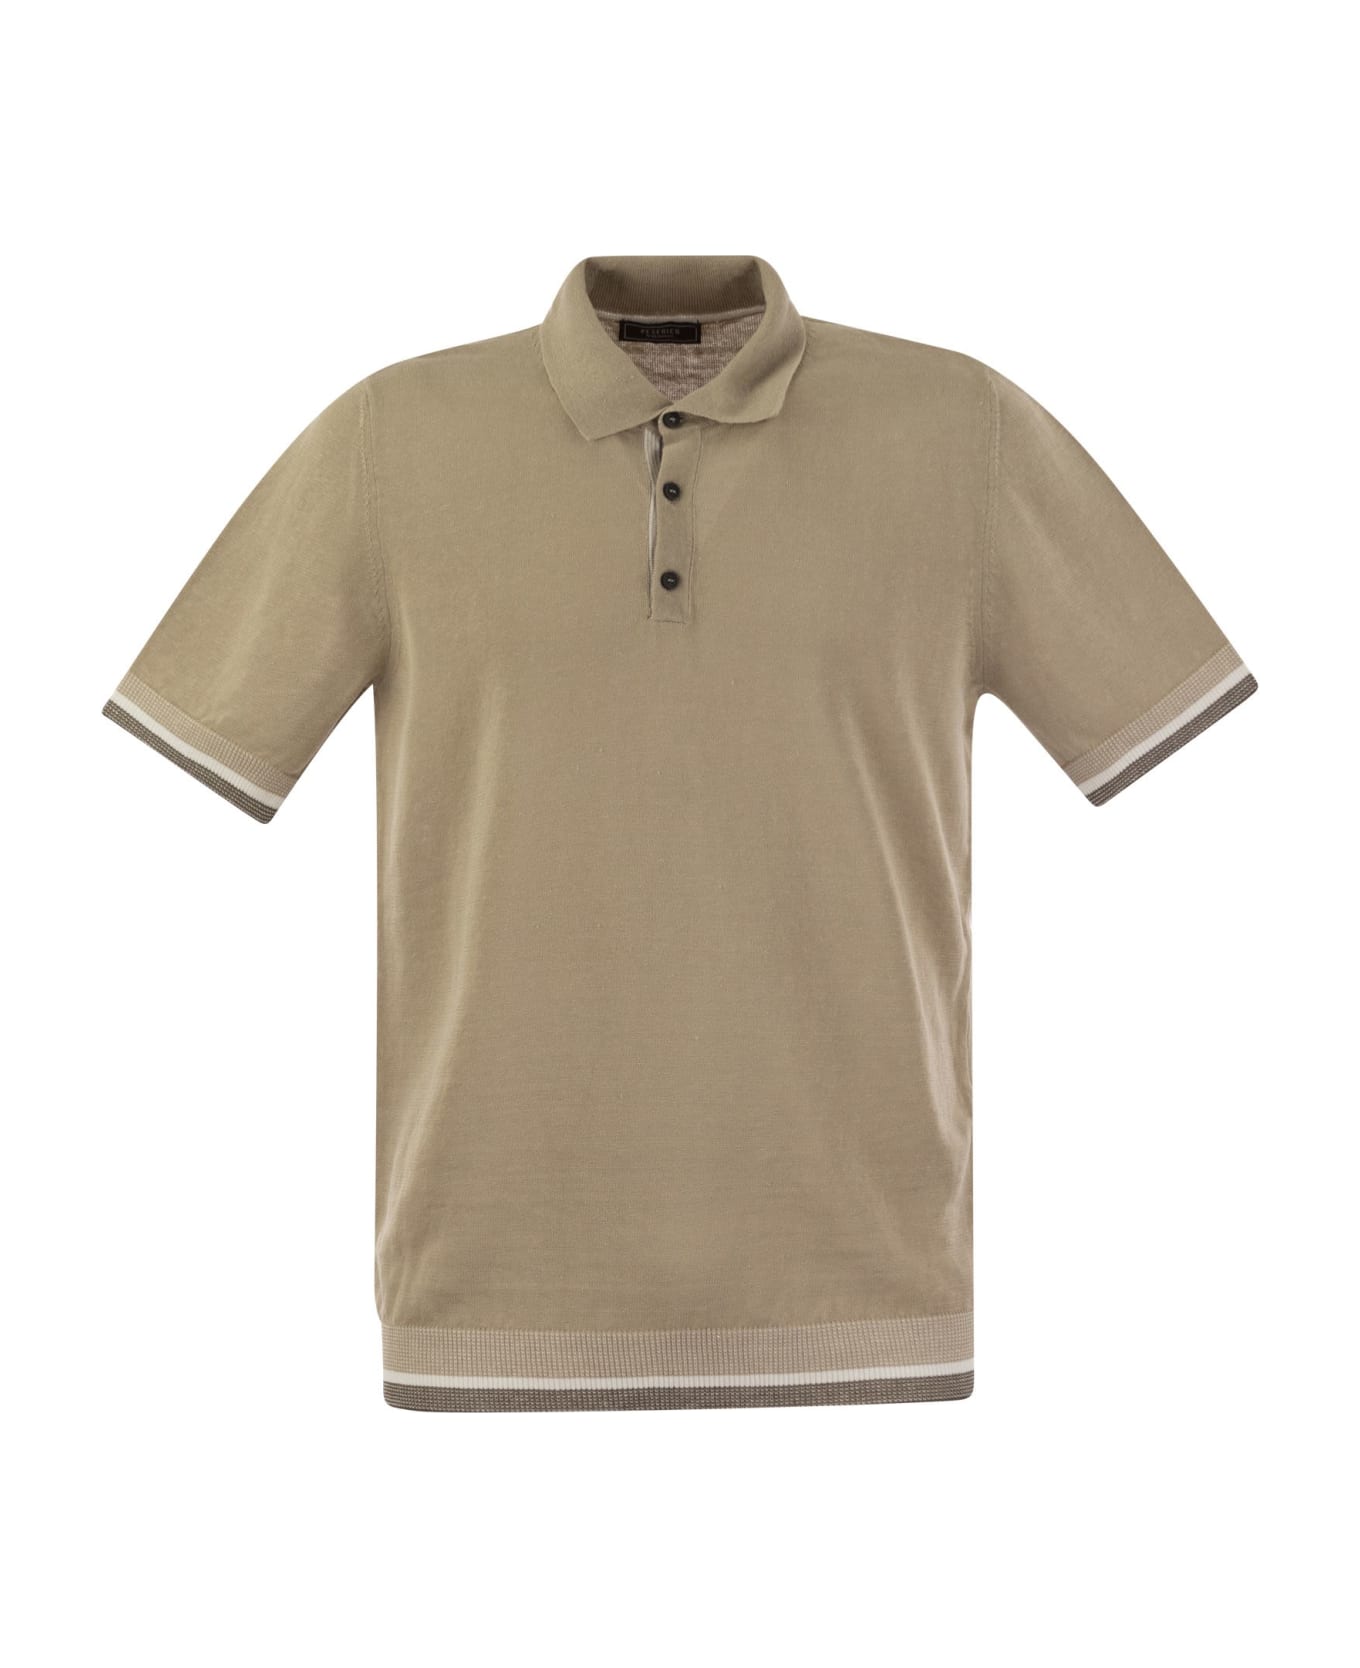 Peserico Linen And Cotton Yarn Jersey - Beige